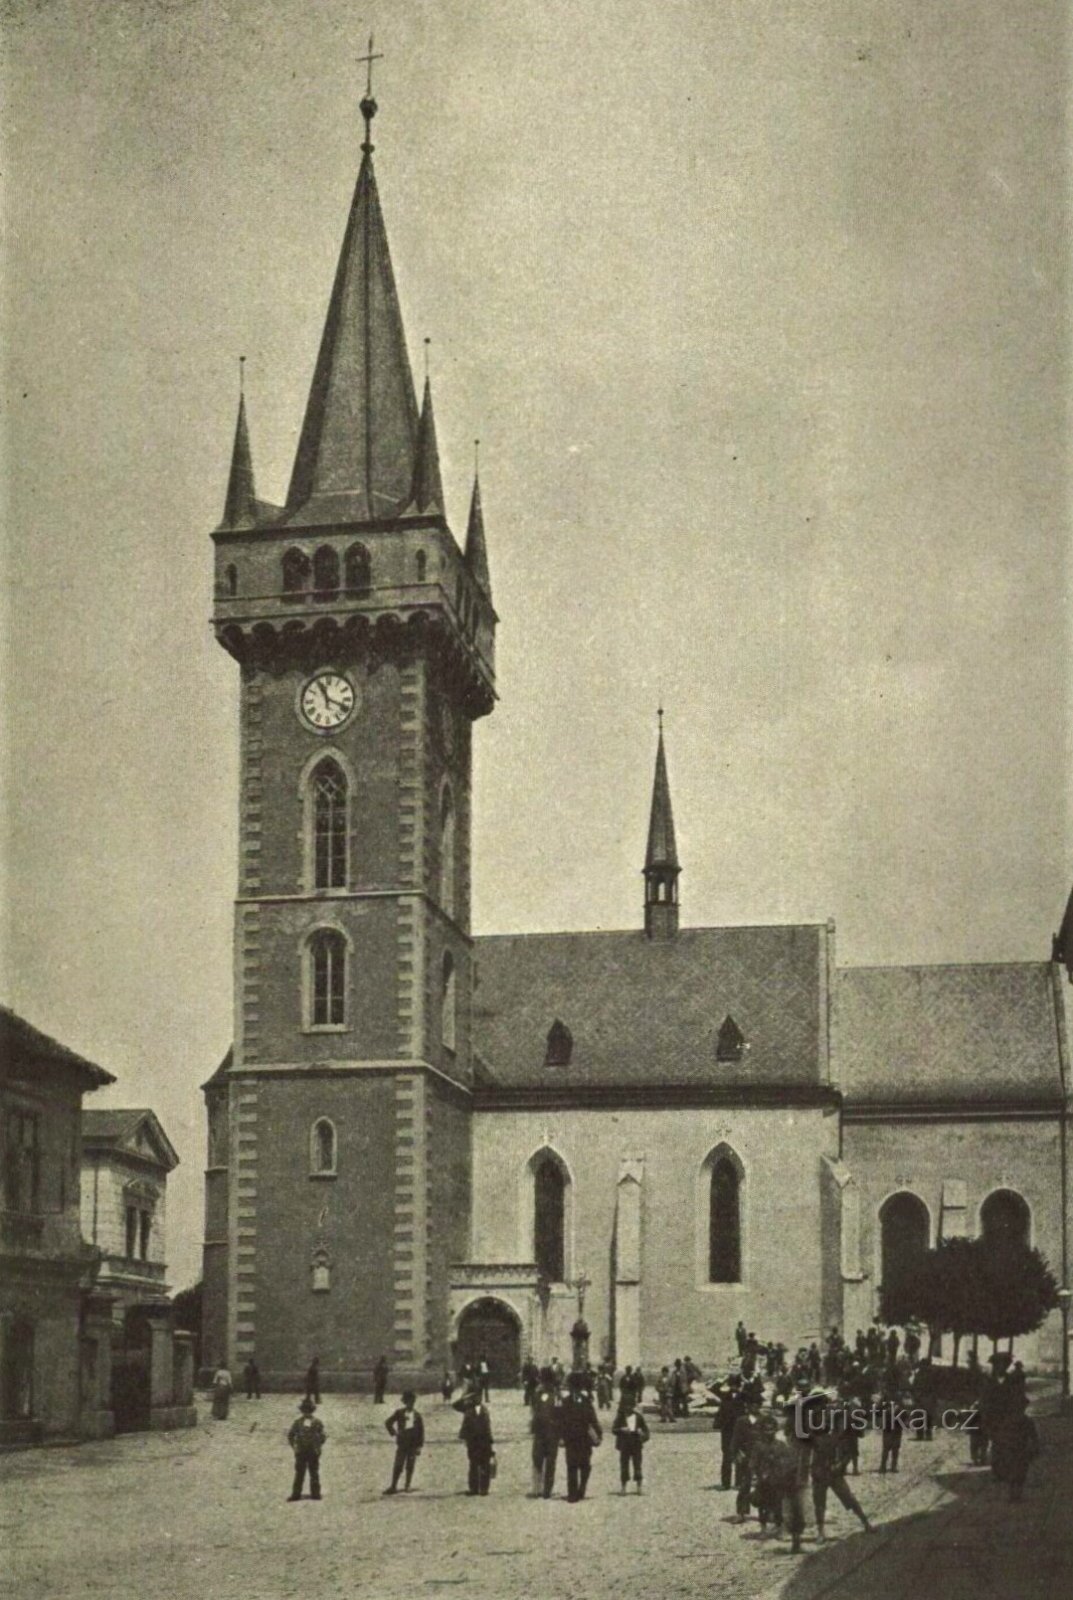 Parish church with bell tower in Dvůr Králové nad Labem before 1907